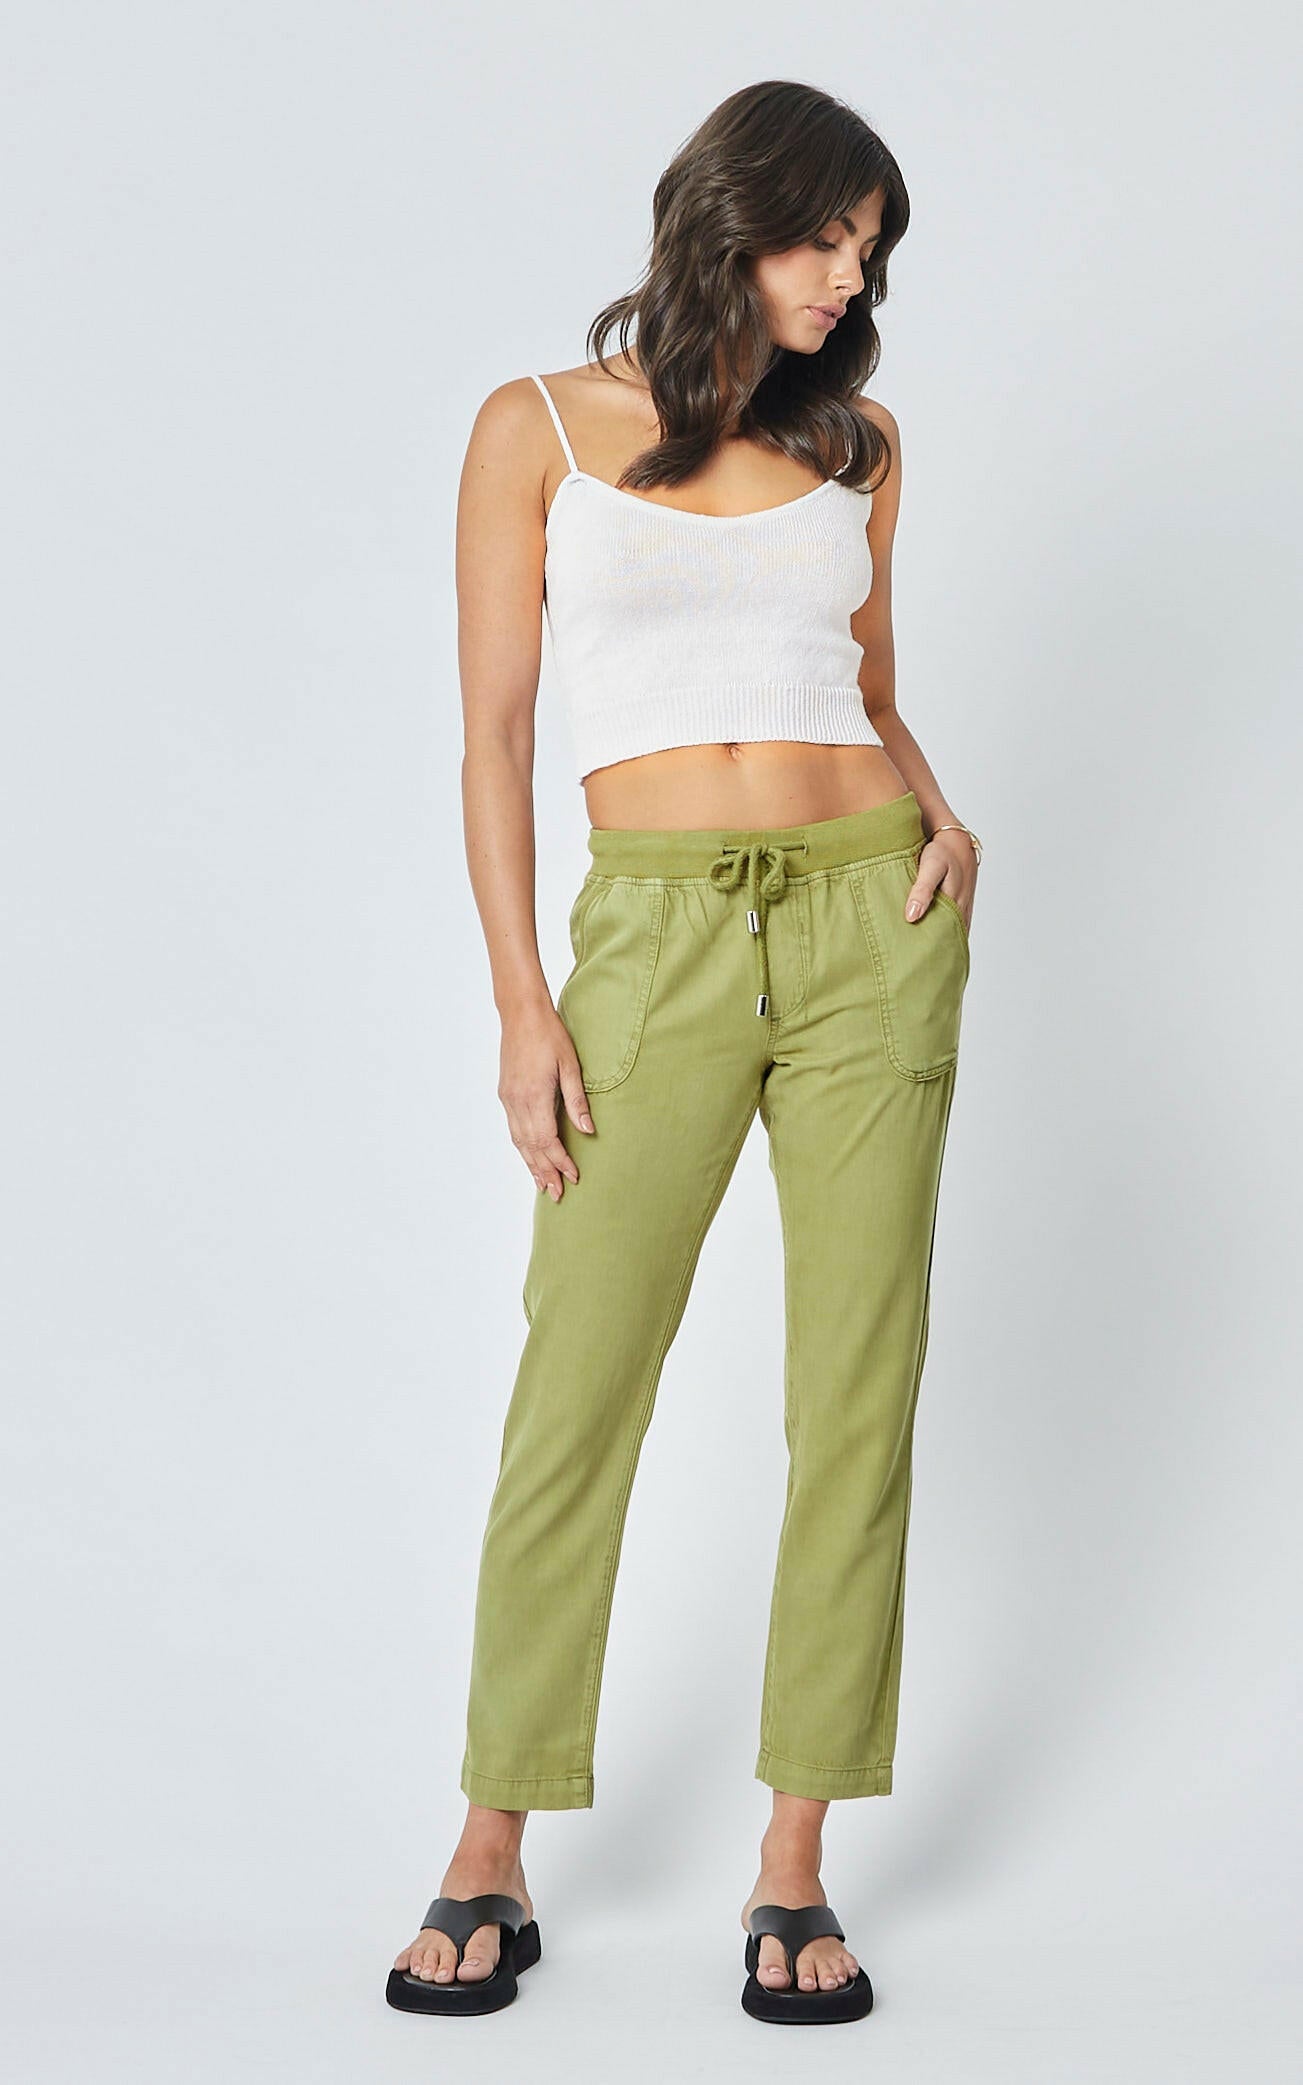 Symphony Lover New - Linen Trousers for Women